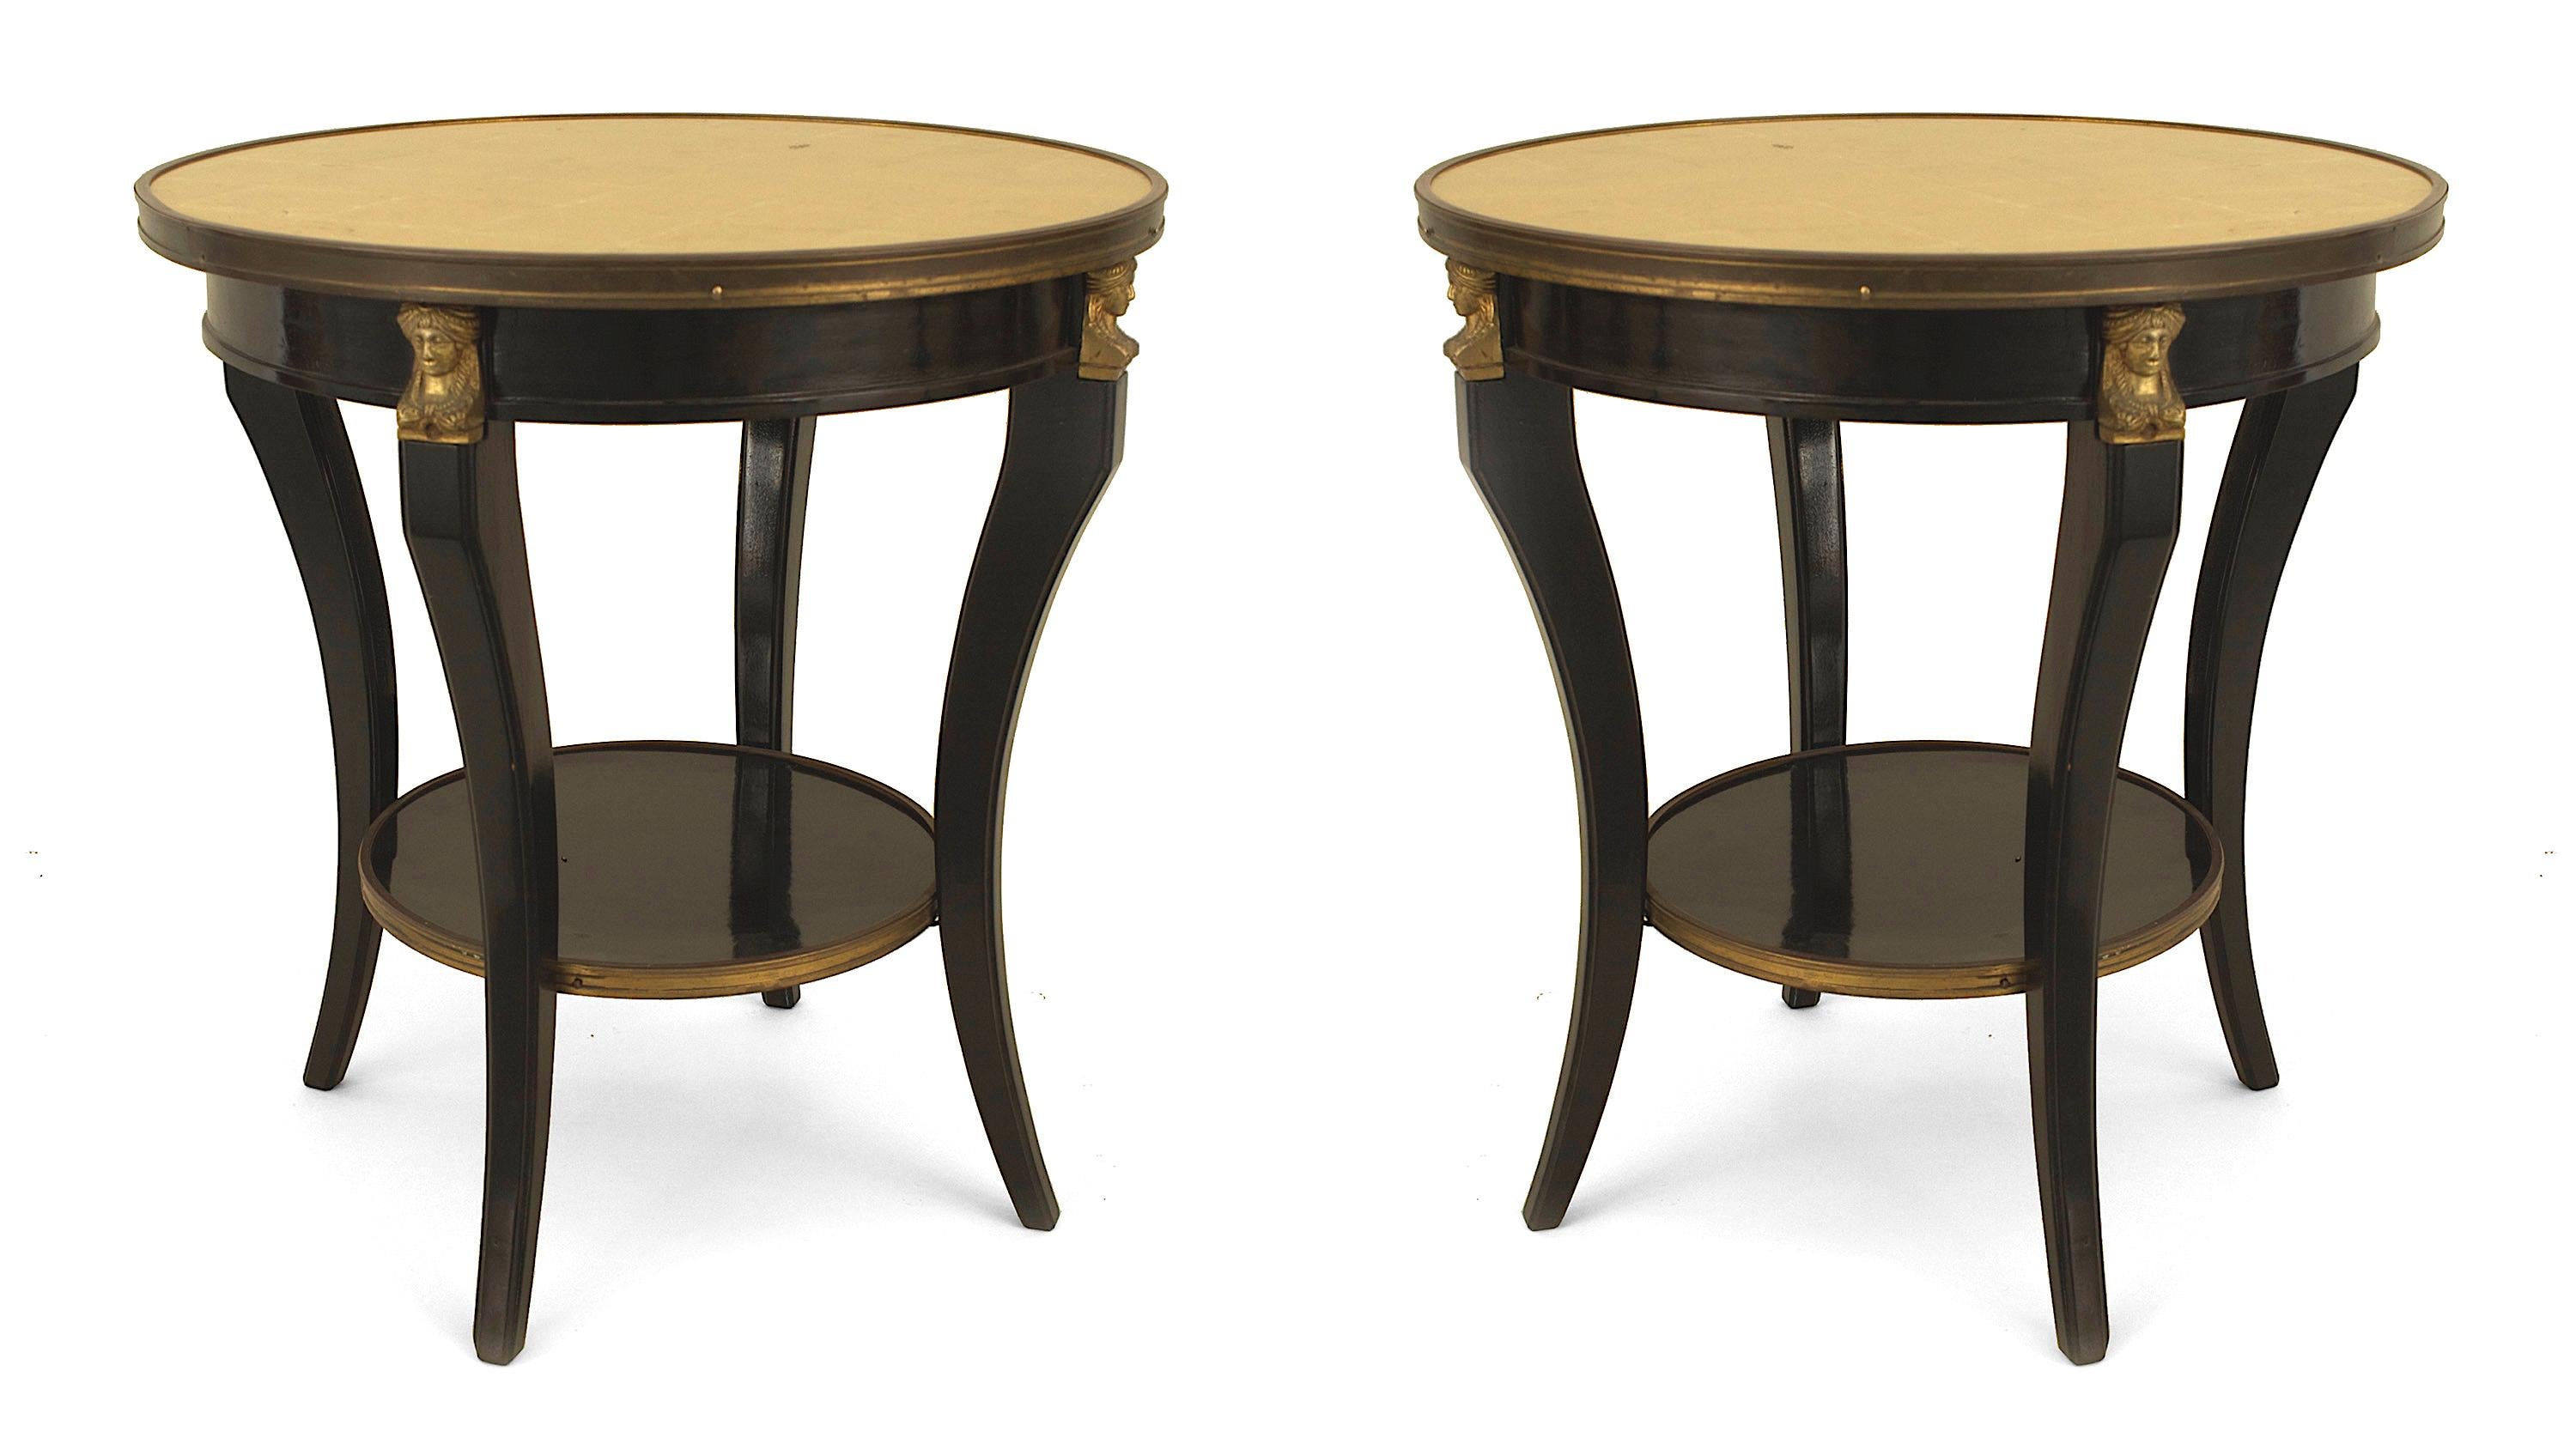 Pair of French 1940s (Louis XVI style) ebonized and bronze trimmed round end tables with four concave legs supported by a round shelf stretcher and gilt glass inset tops (stamped: JANSEN).

Maison Jansen was a Paris-based interior decoration office